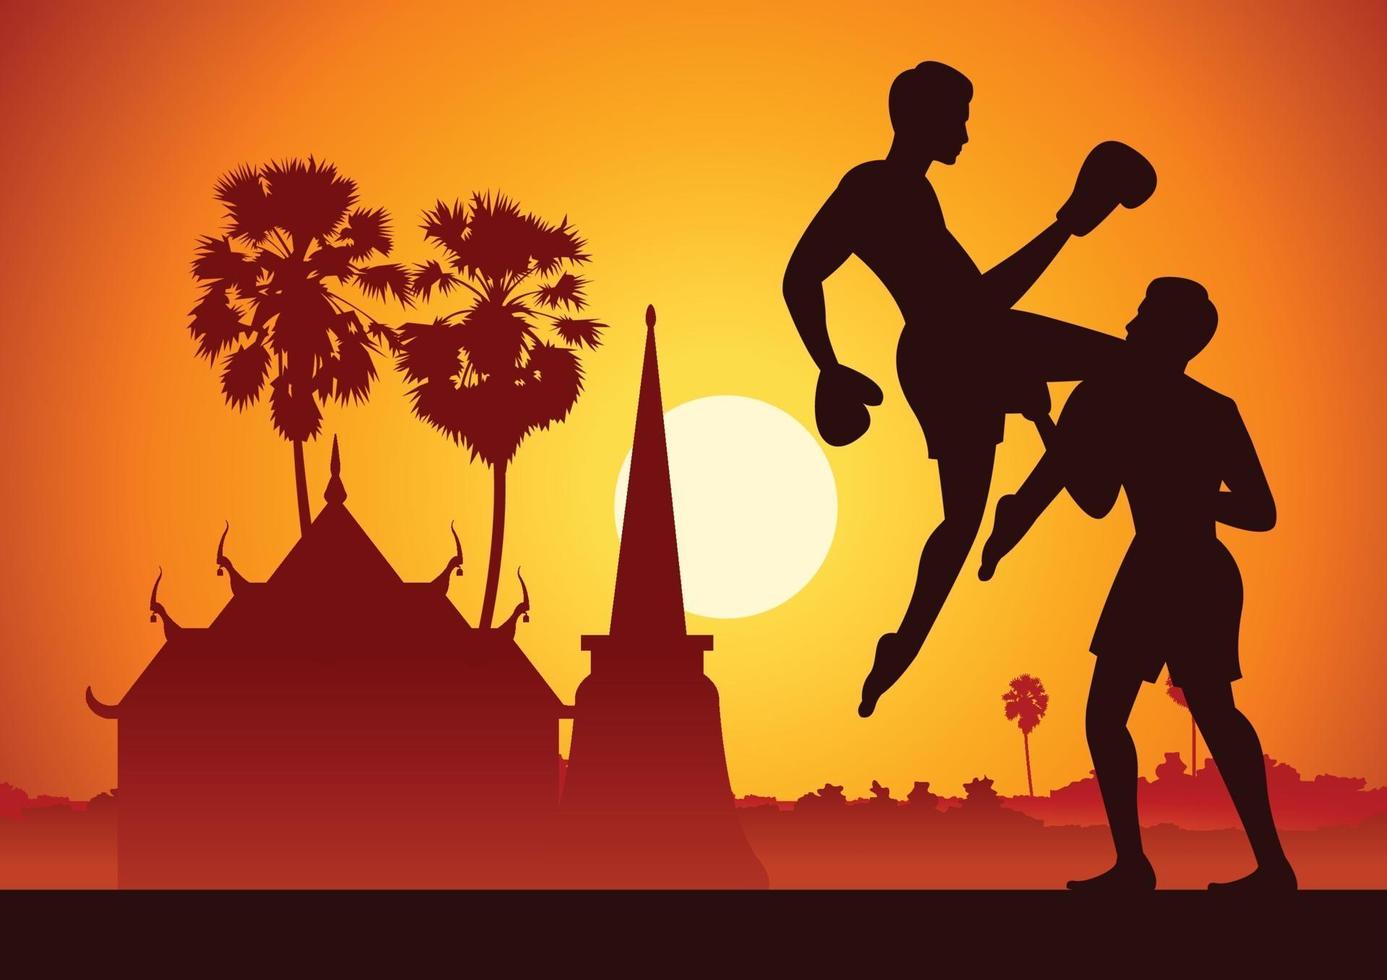 Thailand famous martial arts in scenery, silhouette design vector